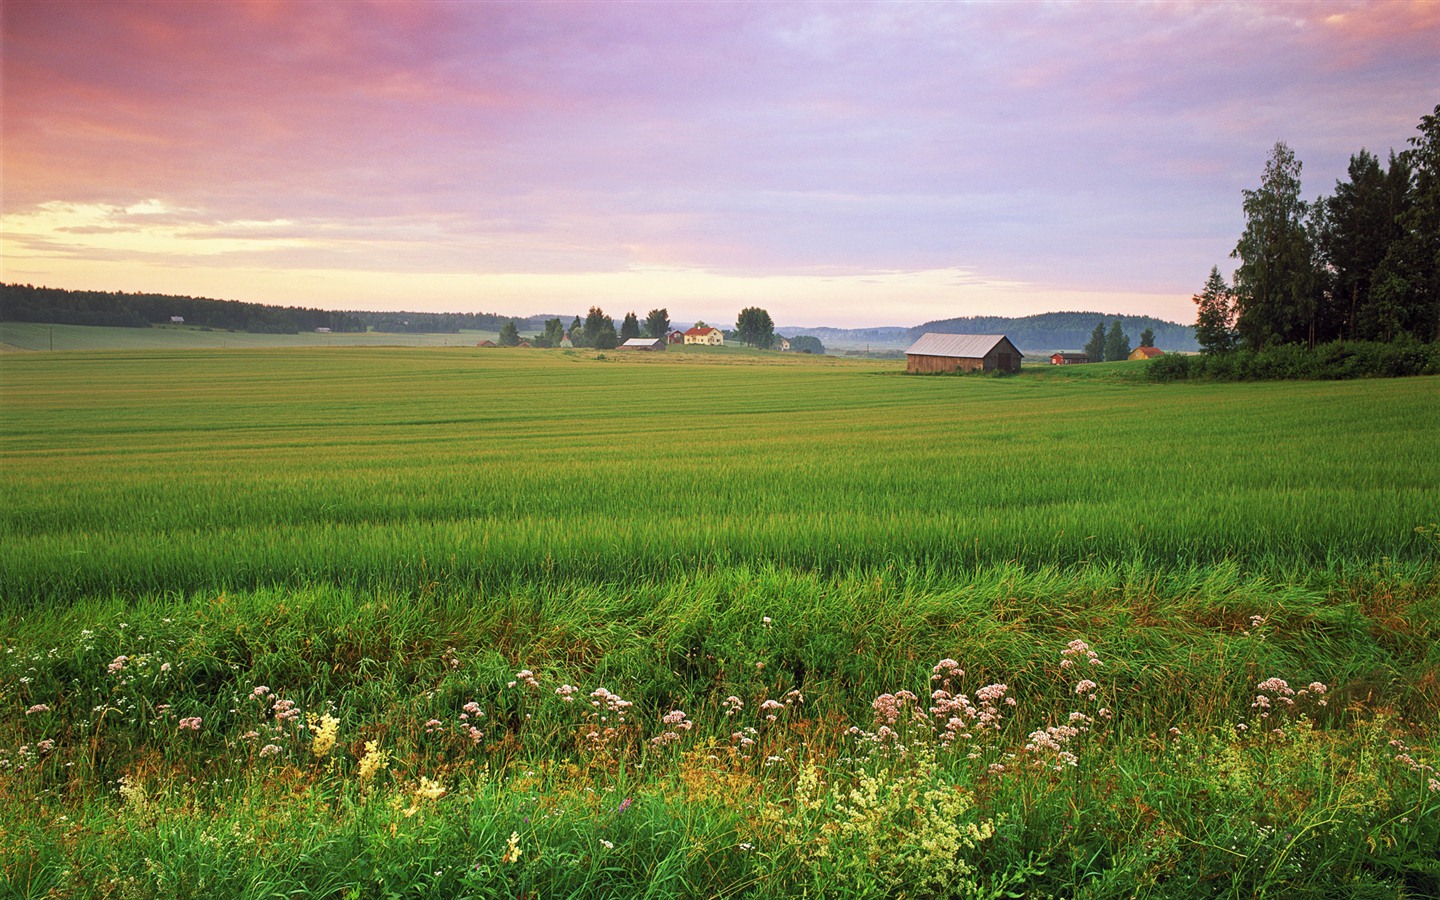 Windows 7 Wallpapers: Nordic Landscapes #9 - 1440x900